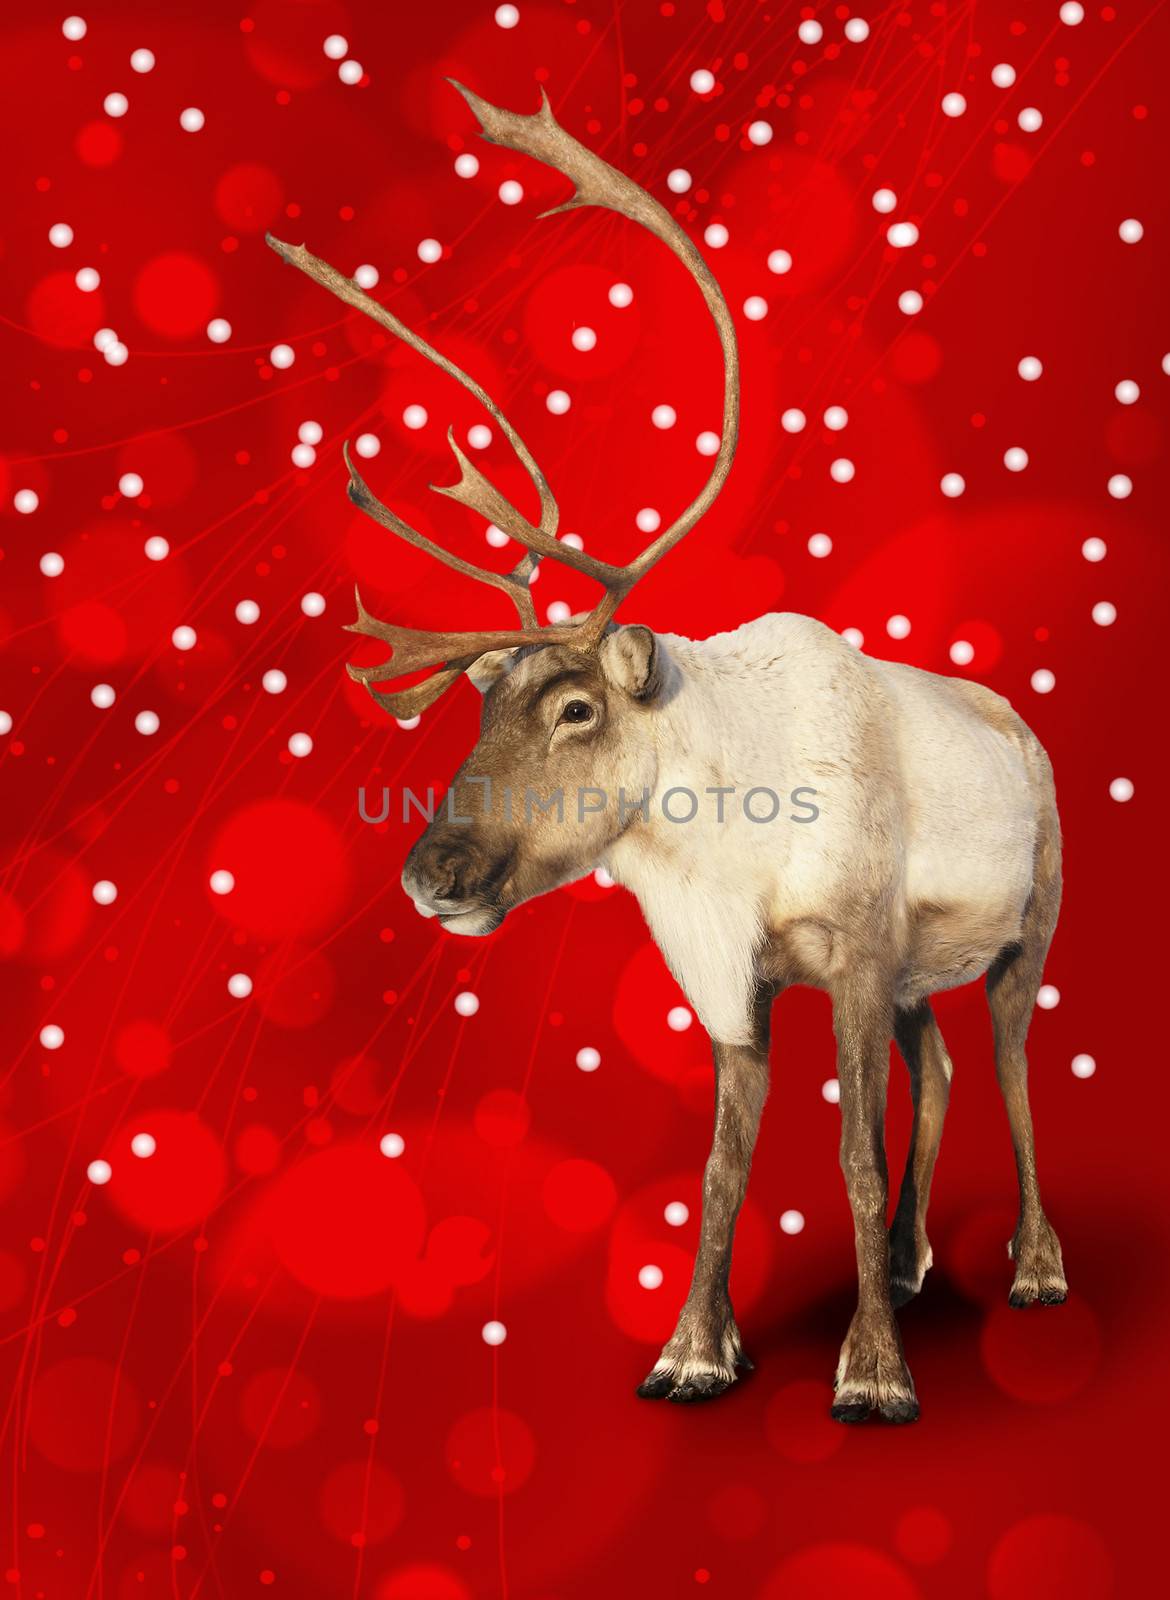 Caribou reindeer on red by Mirage3